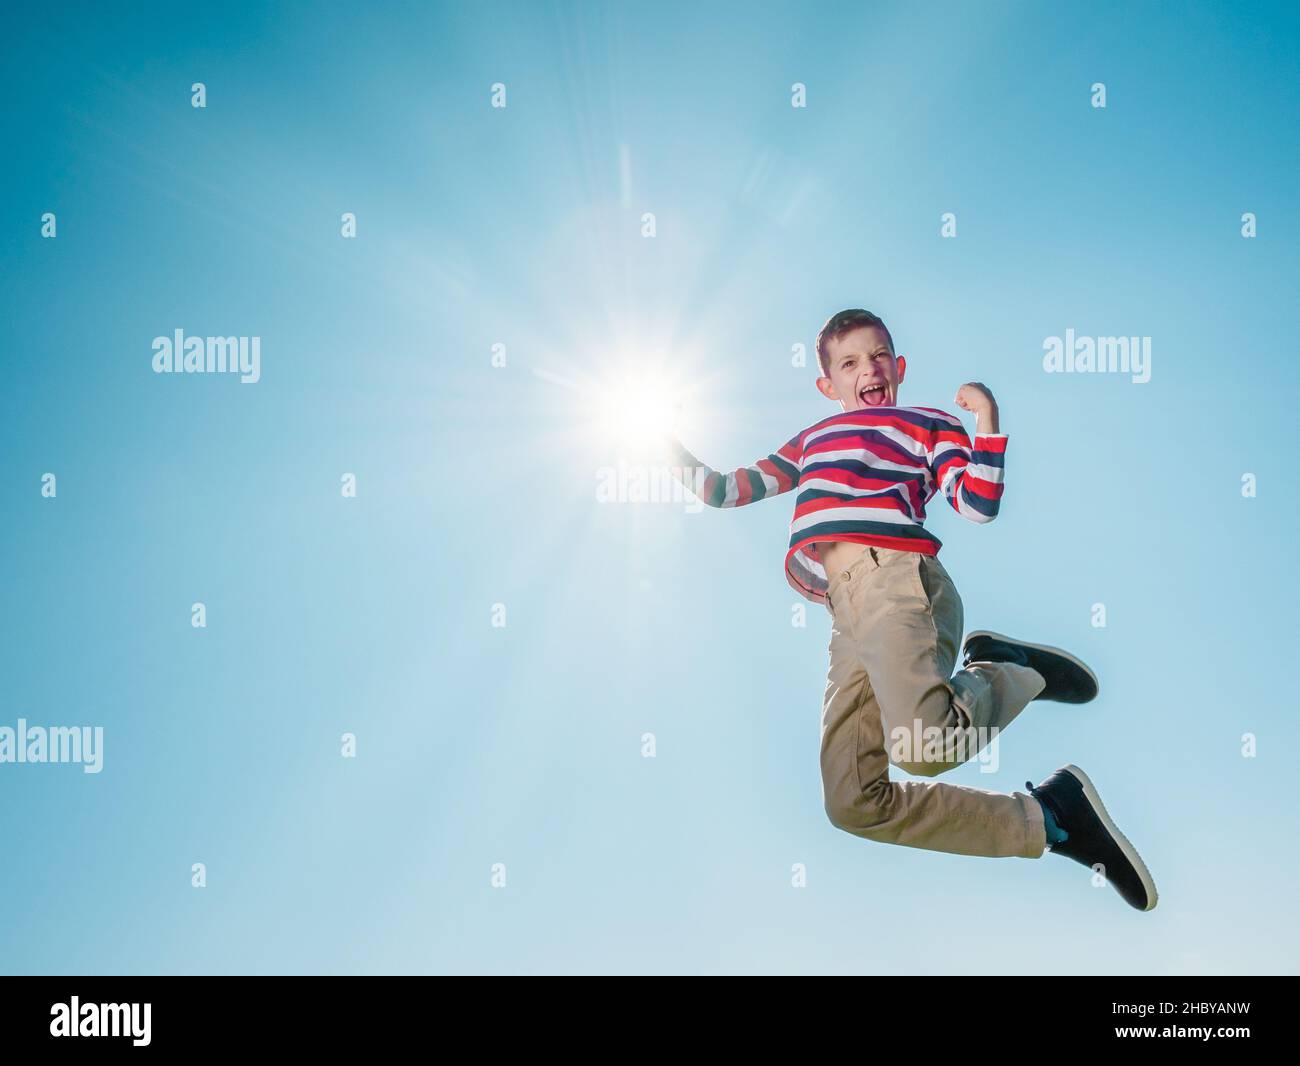 7 year old boy jumping so high and pretending to touch the sun with his right hand, isolated outdoors, active life and freedom concept Stock Photo